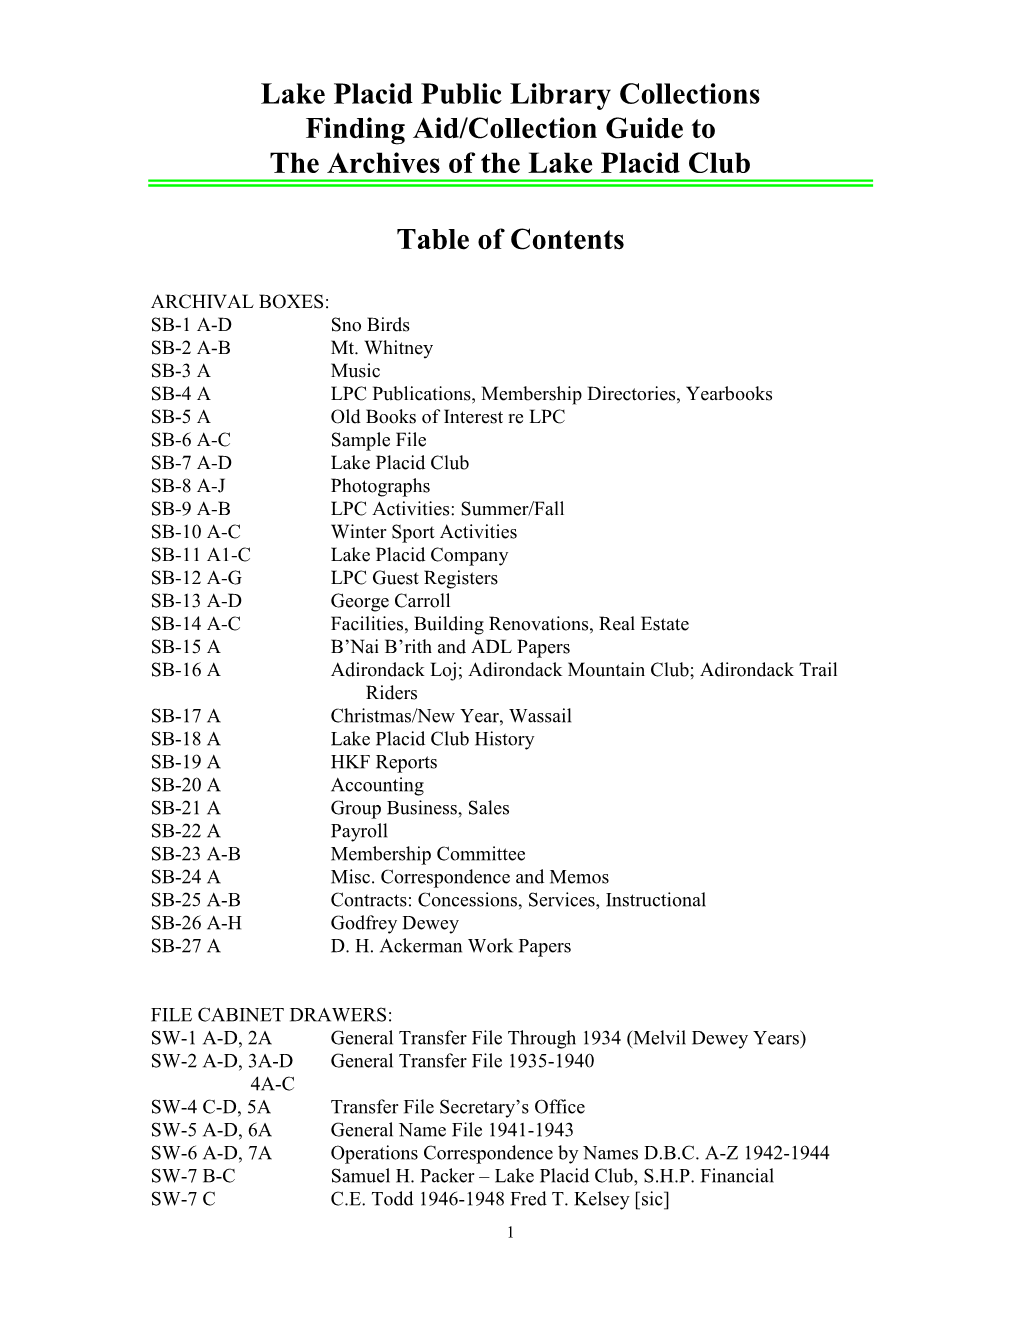 Lake Placid Club Archives Collection Guide